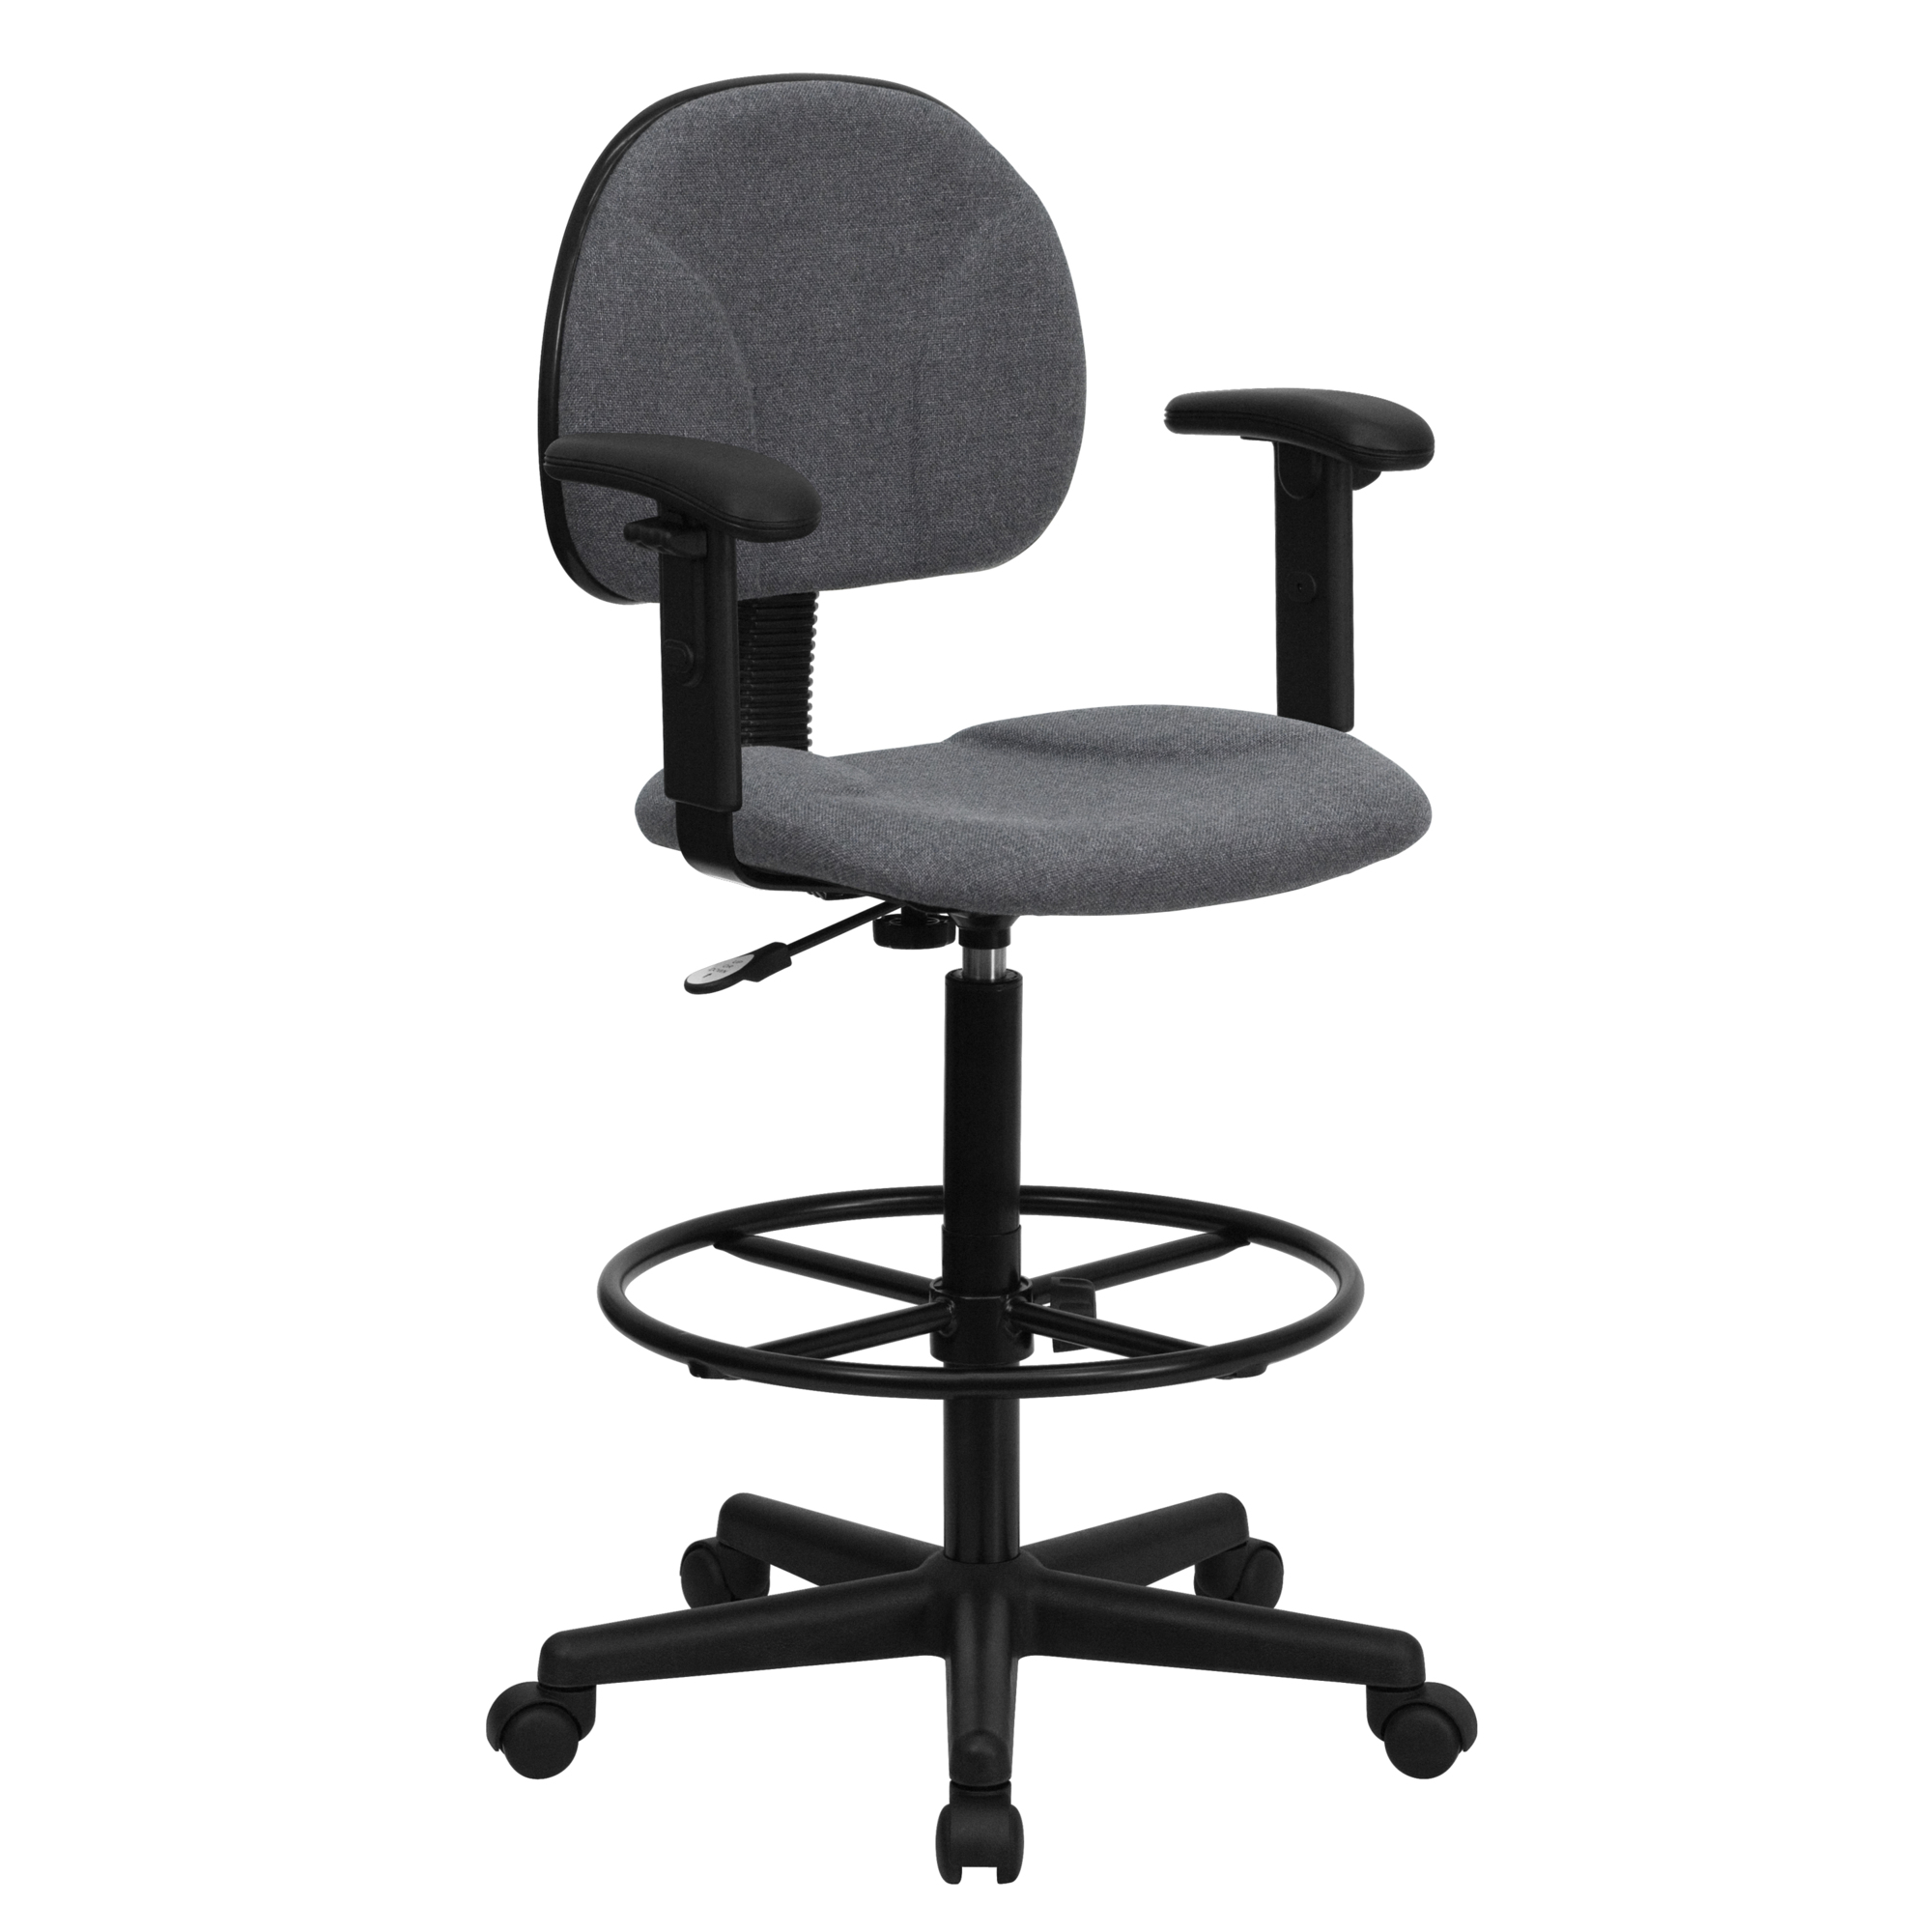 Flash Furniture, Gray Fabric Drafting Chair with Adjustable Arms, Primary Color Gray, Included (qty.) 1, Model BT659GRYARMS